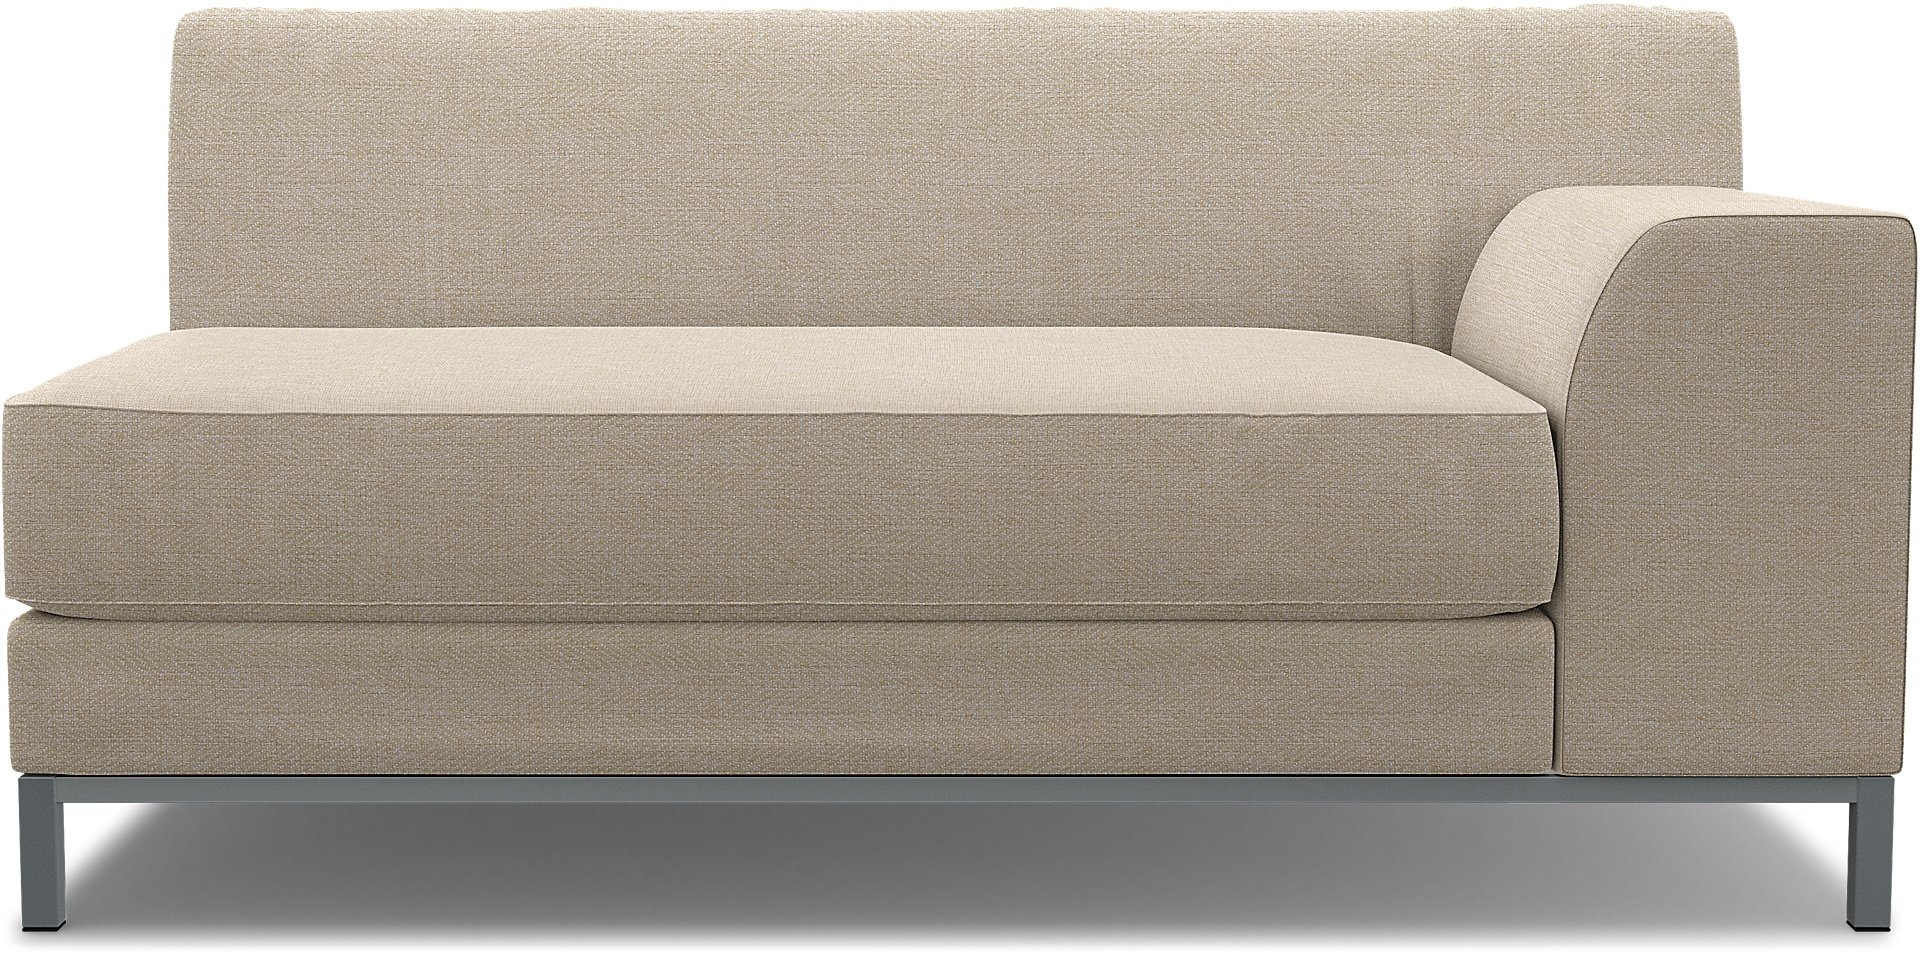 IKEA - Kramfors 2 Seater Sofa with Right Arm Cover, Natural, Boucle & Texture - Bemz